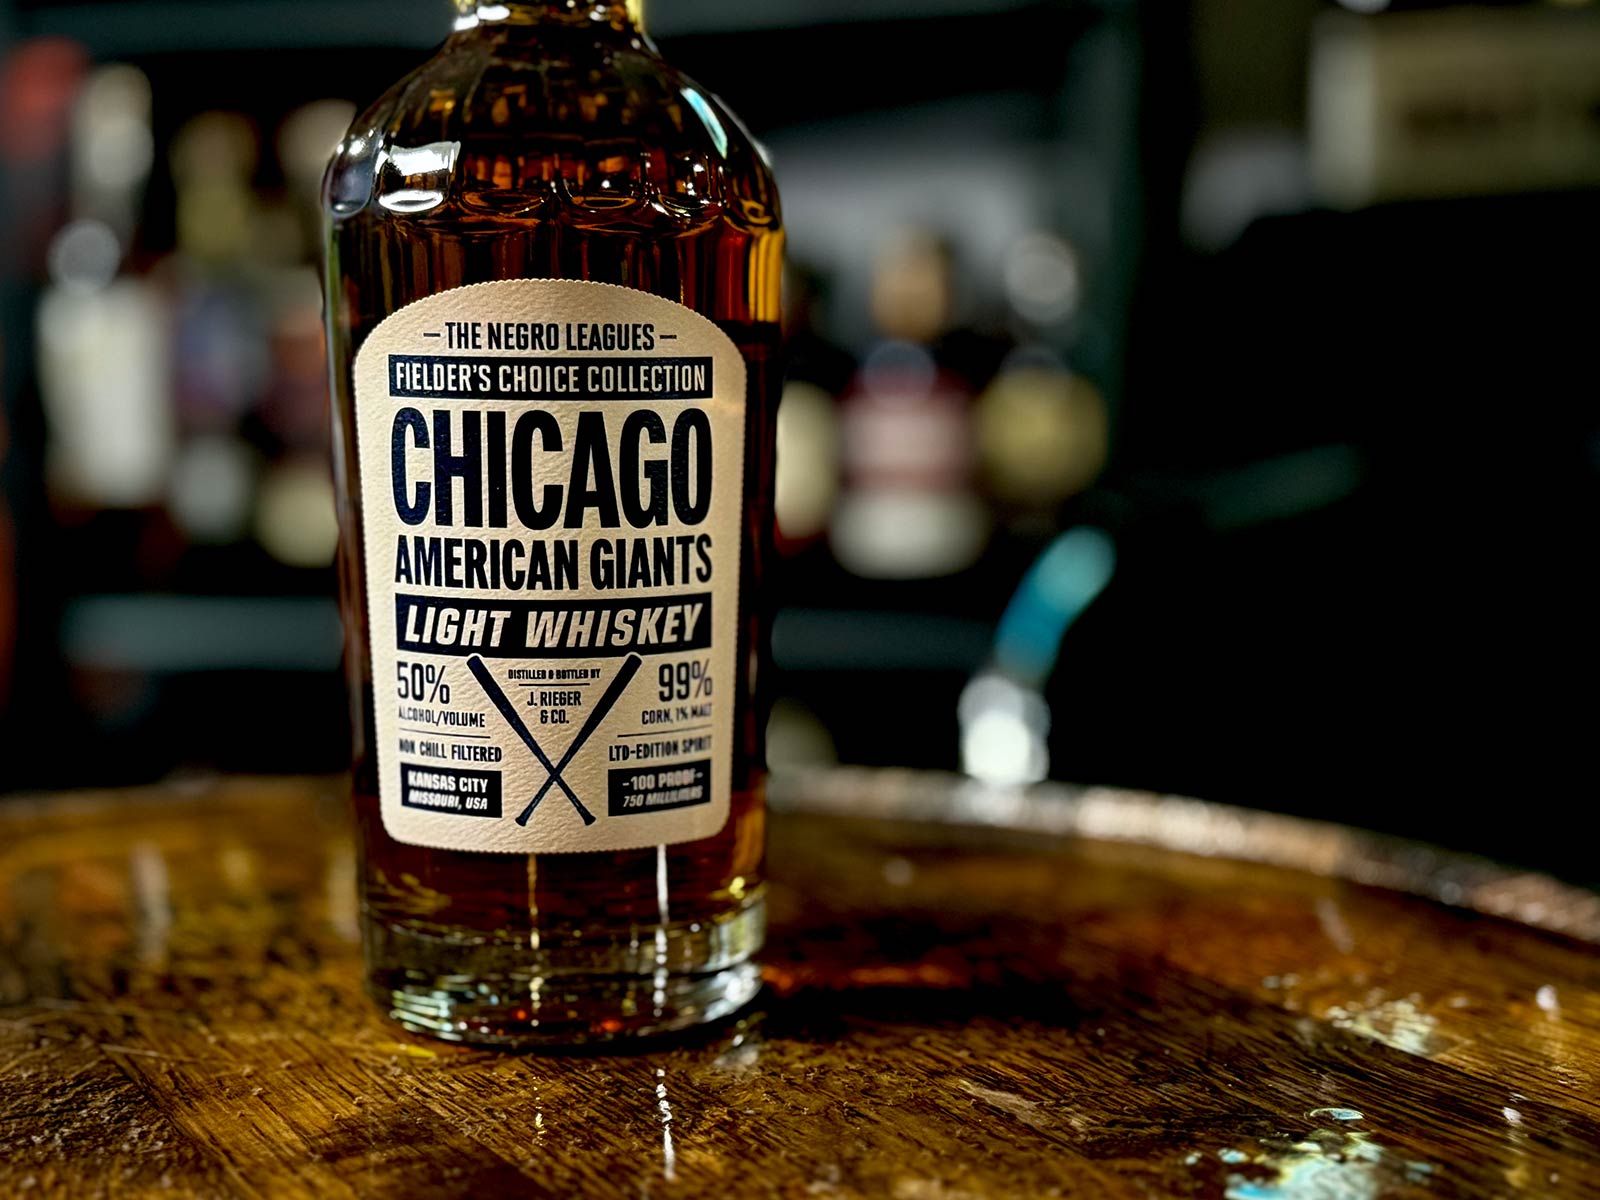 CHICAGO AMERICAN GIANTS LIMITED-EDITION LIGHT CORN WHISKEY